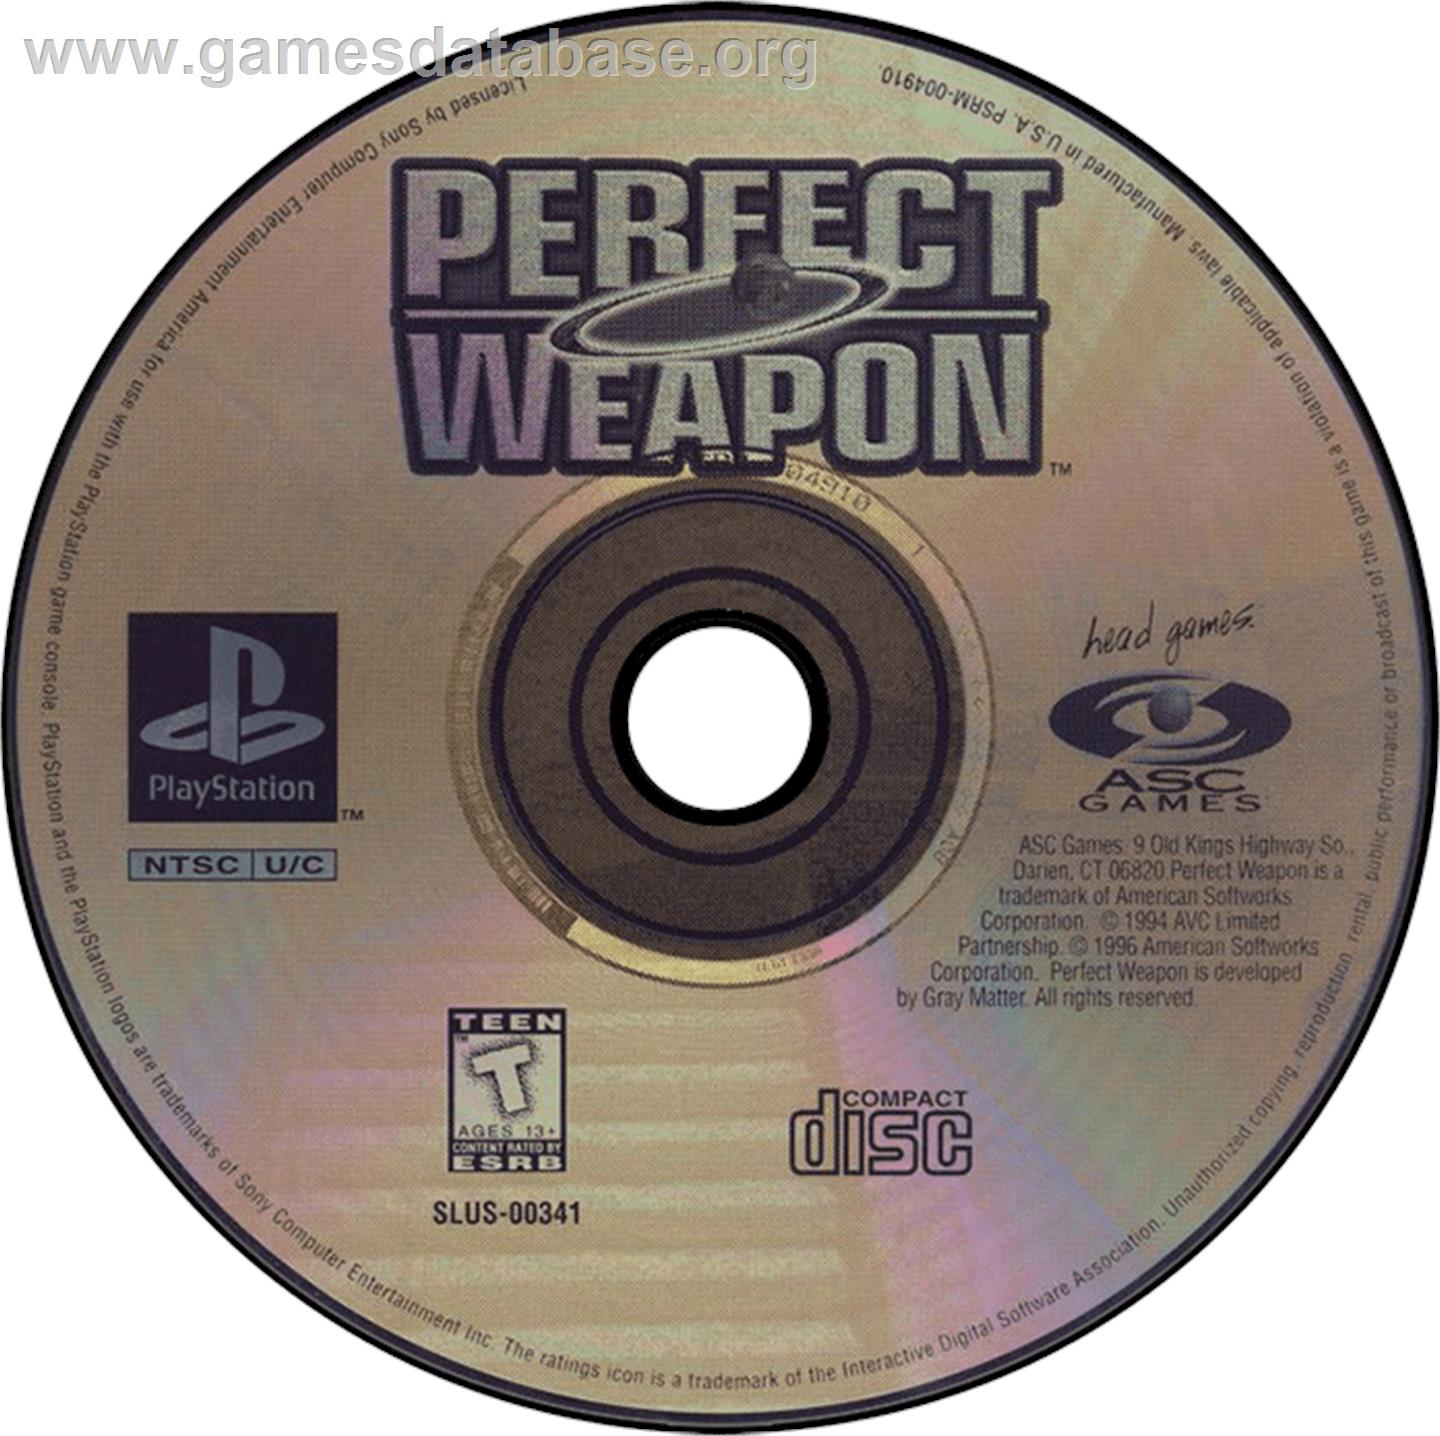 Perfect Weapon - Sony Playstation - Artwork - Disc